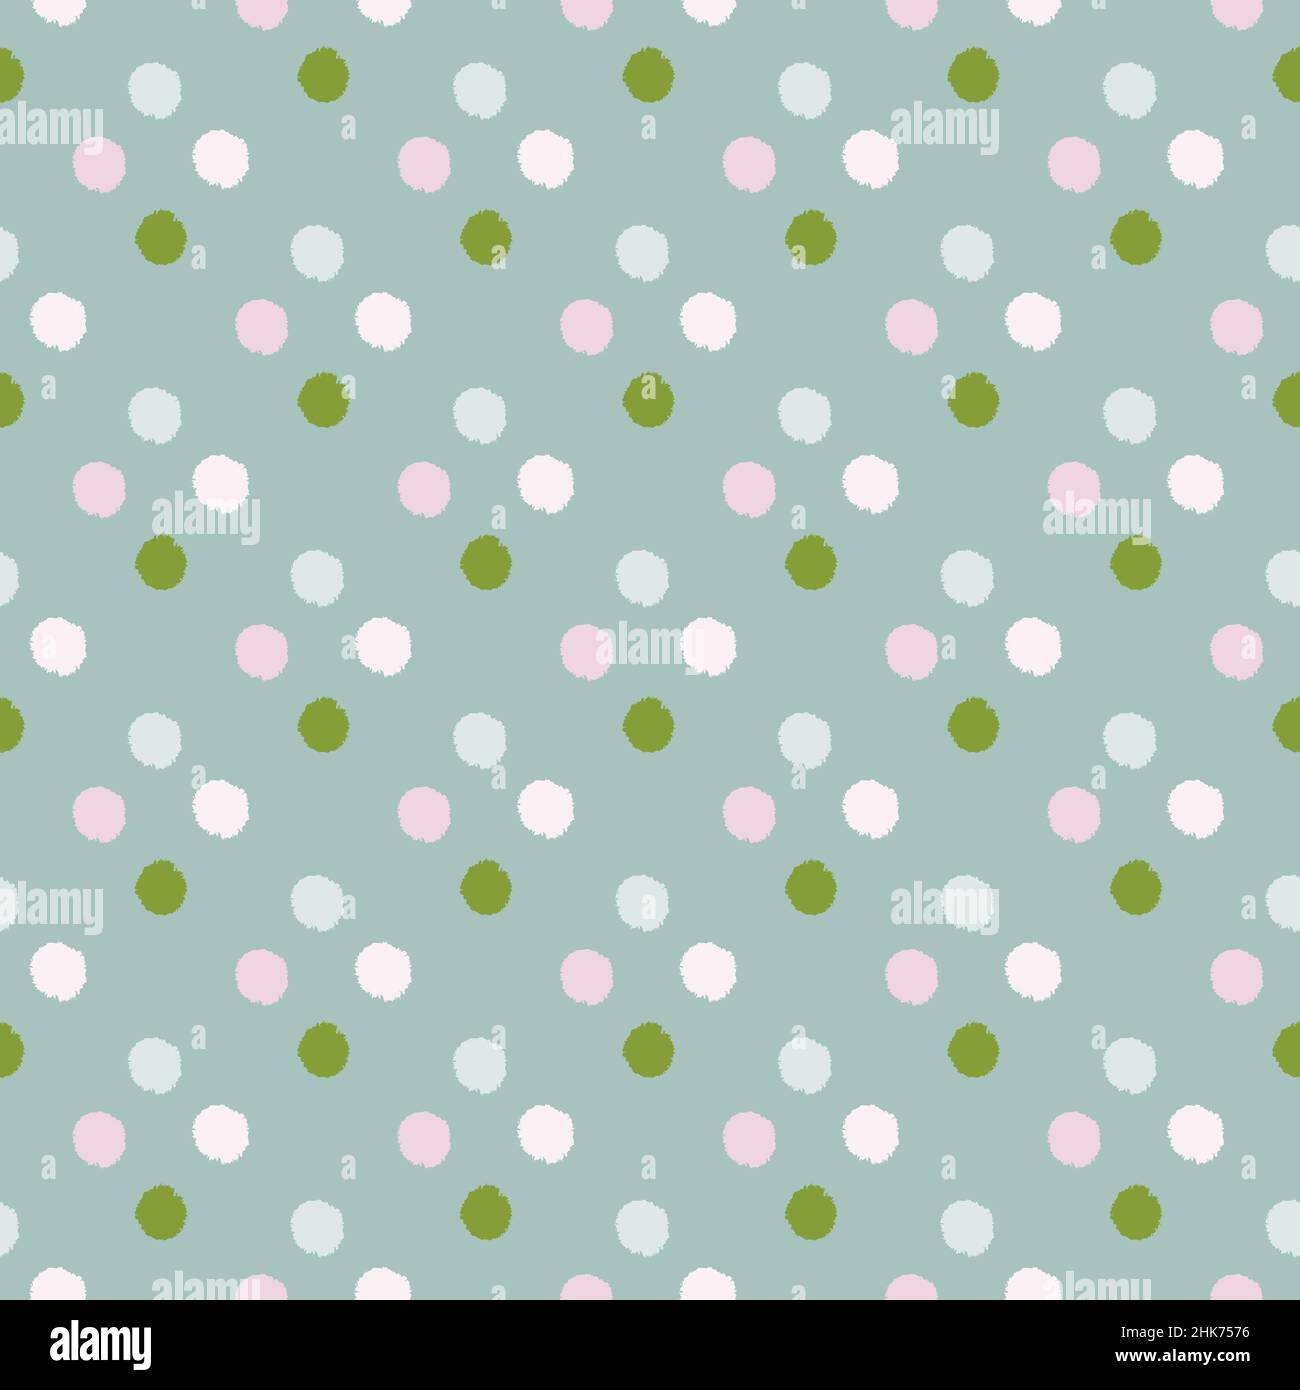 Pom poms of seamless pattern. Hand drawn cute background. Repeated texture in doodle style for fabric, wrapping paper, wallpaper, tissue. Vector illus Stock Vector